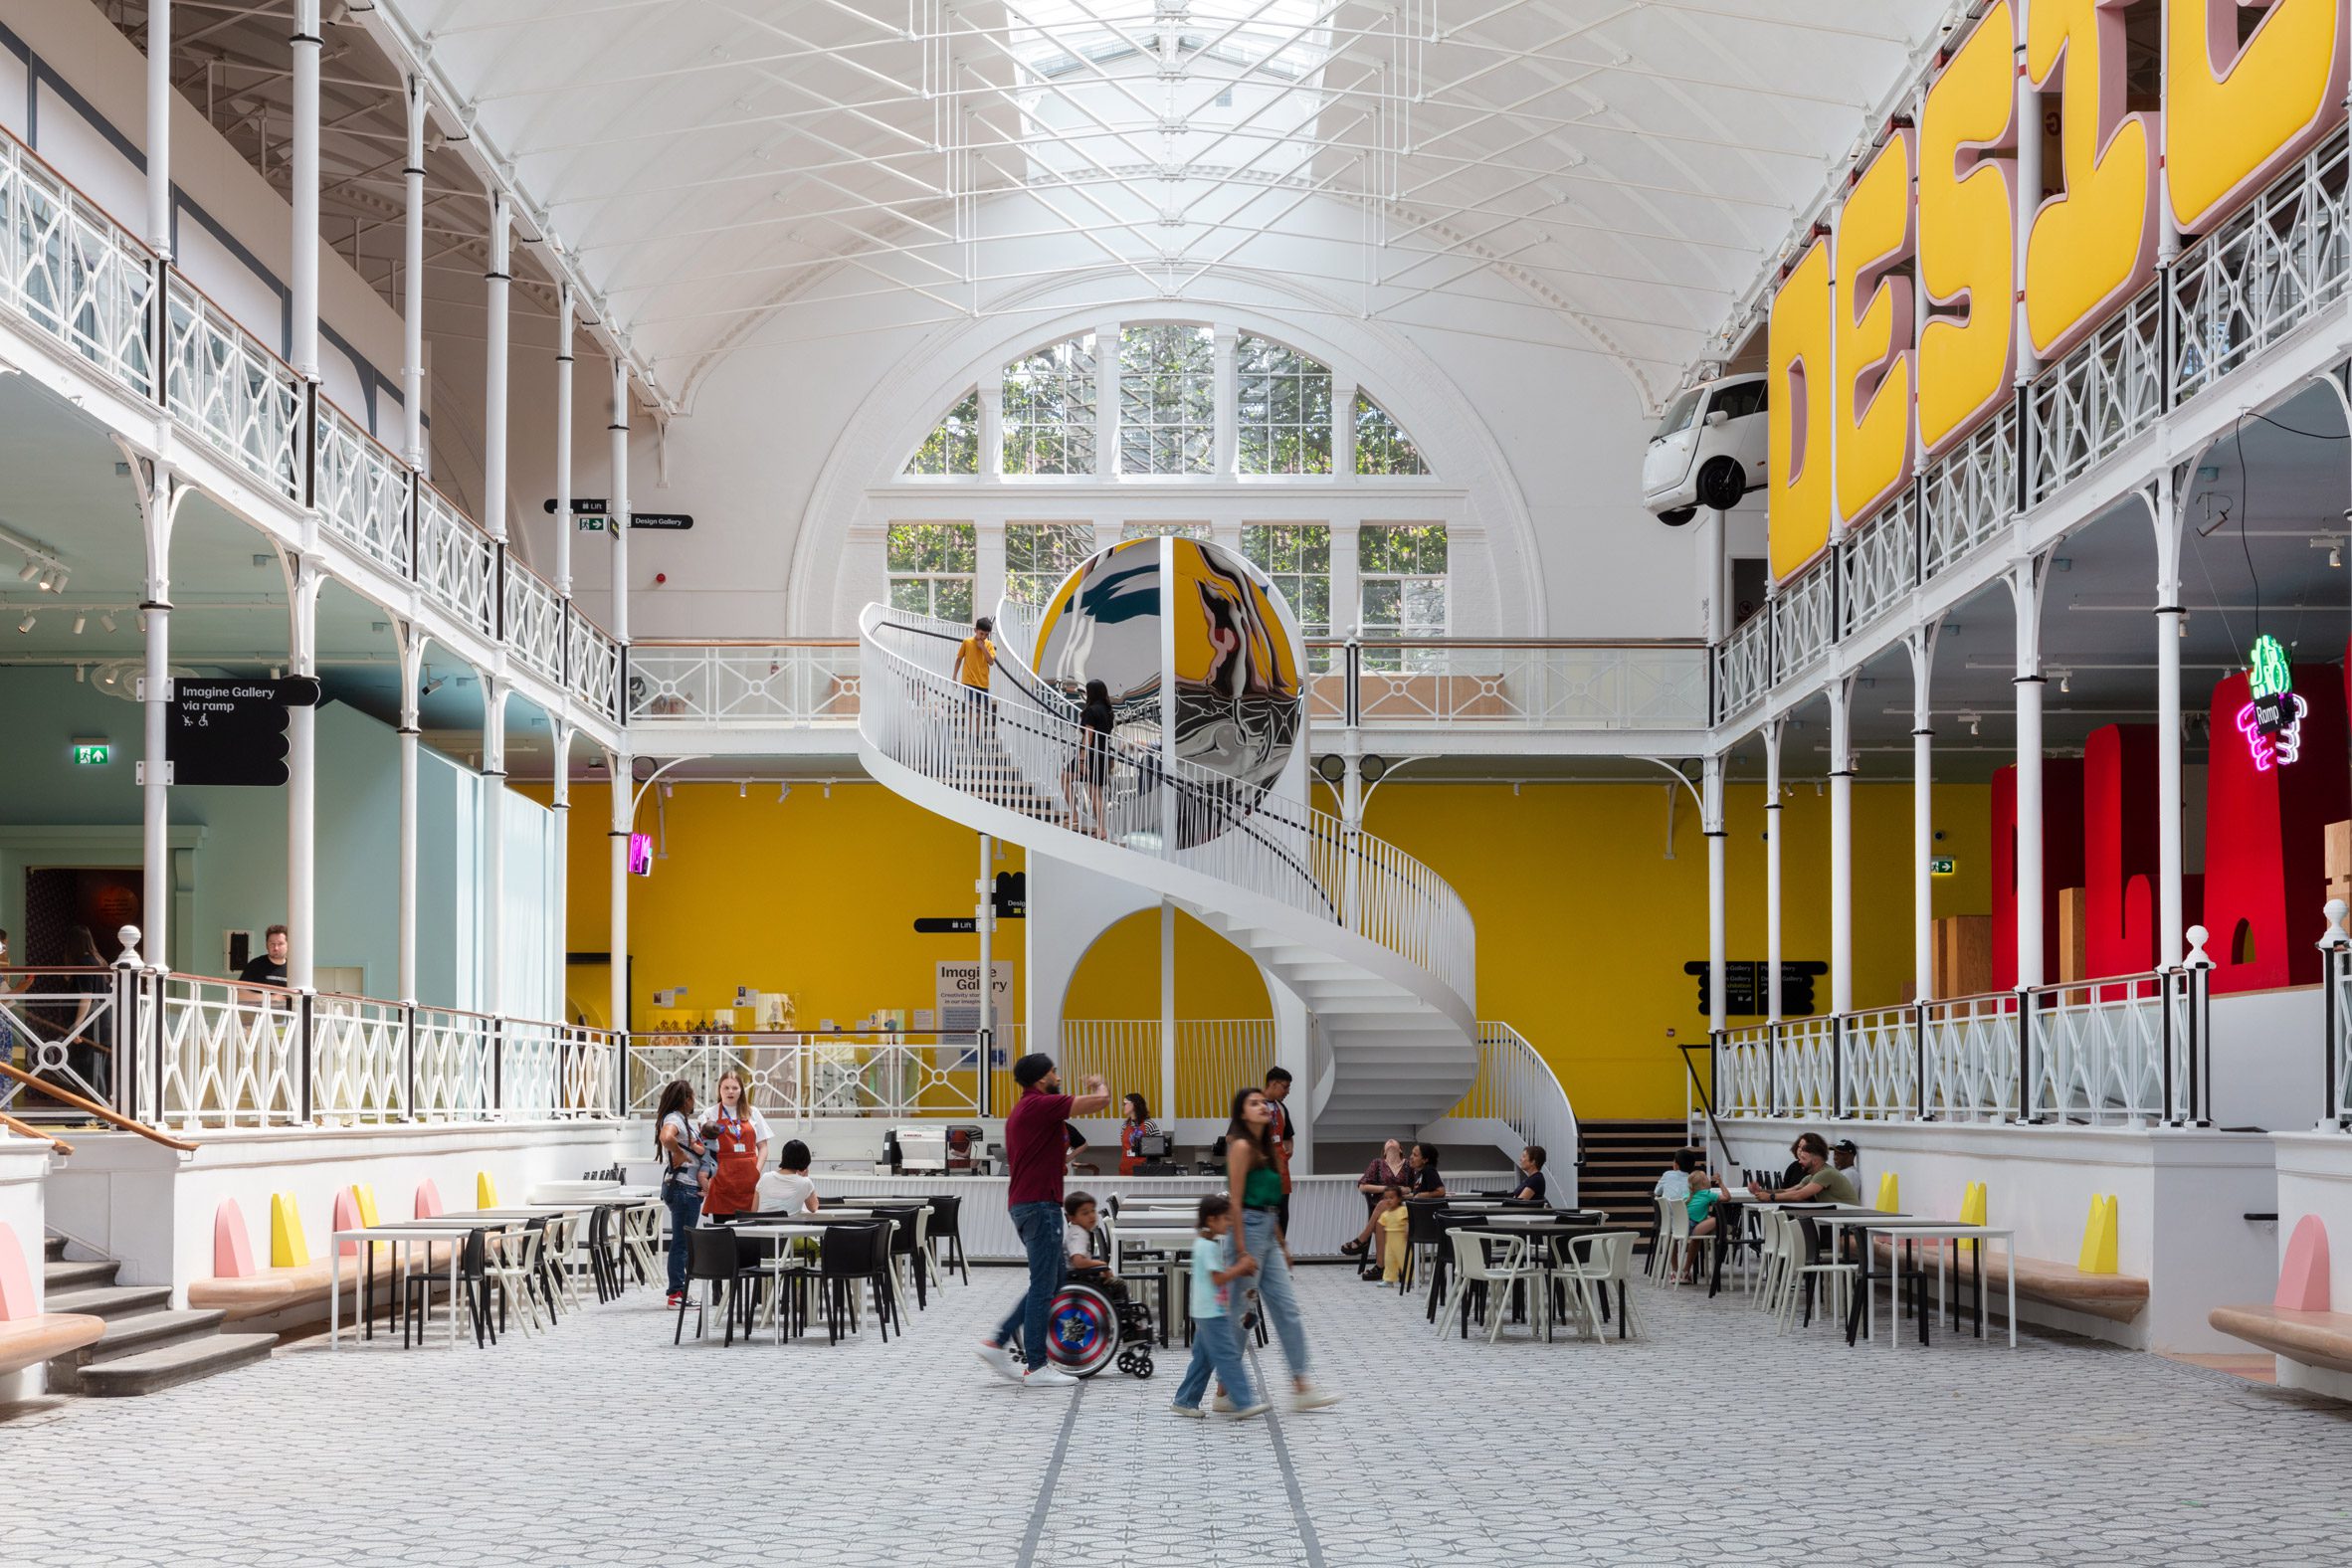 Central hall of children's museum